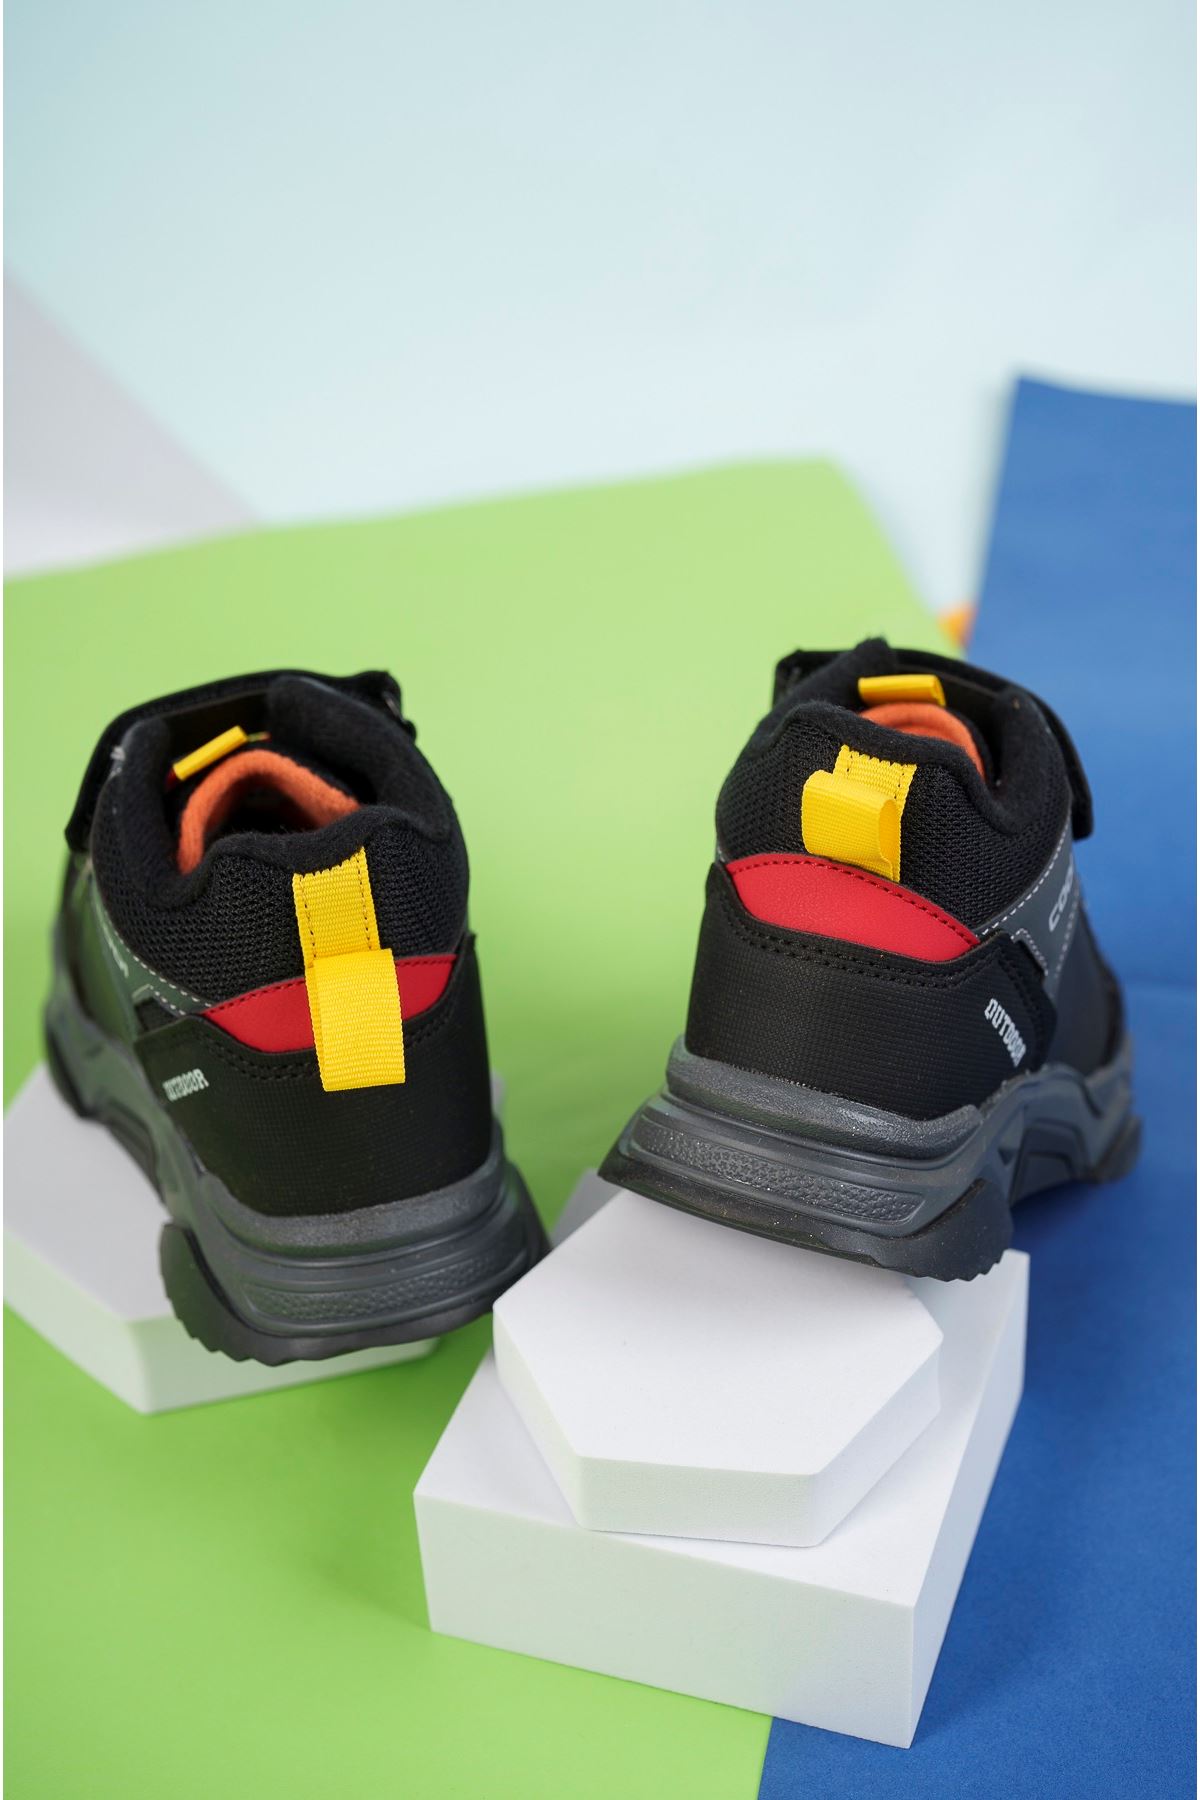 Black Kids Tracking Boots with Velcro